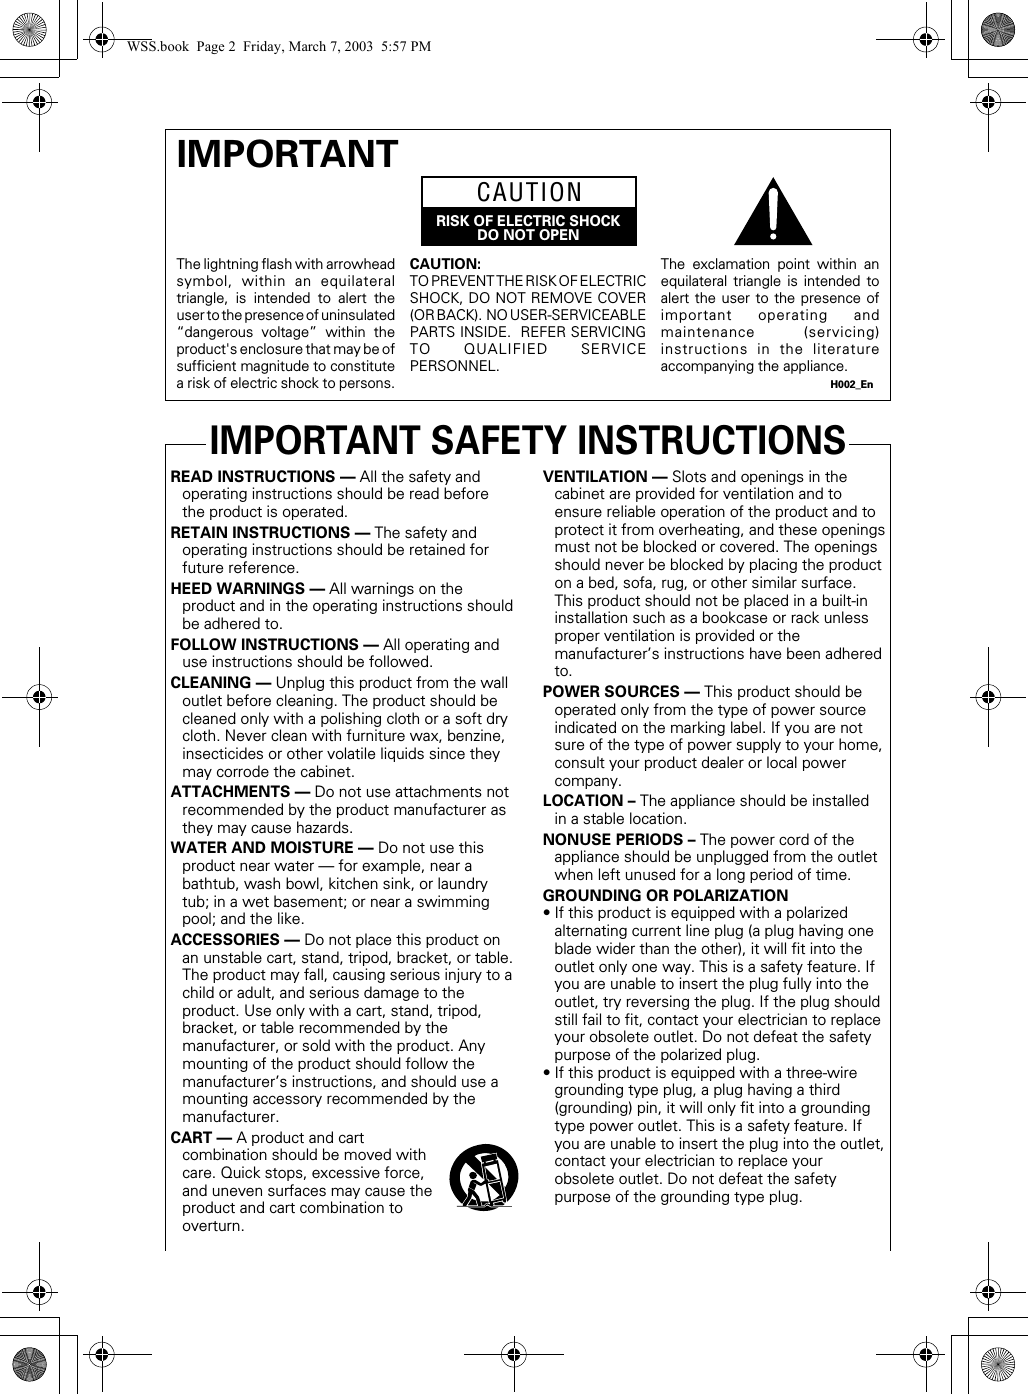 READ INSTRUCTIONS — All the safety andoperating instructions should be read beforethe product is operated.RETAIN INSTRUCTIONS — The safety andoperating instructions should be retained forfuture reference.HEED WARNINGS — All warnings on theproduct and in the operating instructions shouldbe adhered to.FOLLOW INSTRUCTIONS — All operating anduse instructions should be followed.CLEANING — Unplug this product from the walloutlet before cleaning. The product should becleaned only with a polishing cloth or a soft drycloth. Never clean with furniture wax, benzine,insecticides or other volatile liquids since theymay corrode the cabinet.ATTACHMENTS — Do not use attachments notrecommended by the product manufacturer asthey may cause hazards.WATER AND MOISTURE — Do not use thisproduct near water — for example, near abathtub, wash bowl, kitchen sink, or laundrytub; in a wet basement; or near a swimmingpool; and the like.ACCESSORIES — Do not place this product onan unstable cart, stand, tripod, bracket, or table.The product may fall, causing serious injury to achild or adult, and serious damage to theproduct. Use only with a cart, stand, tripod,bracket, or table recommended by themanufacturer, or sold with the product. Anymounting of the product should follow themanufacturer’s instructions, and should use amounting accessory recommended by themanufacturer.CART — A product and cartcombination should be moved withcare. Quick stops, excessive force,and uneven surfaces may cause theproduct and cart combination tooverturn.VENTILATION — Slots and openings in thecabinet are provided for ventilation and toensure reliable operation of the product and toprotect it from overheating, and these openingsmust not be blocked or covered. The openingsshould never be blocked by placing the producton a bed, sofa, rug, or other similar surface.This product should not be placed in a built-ininstallation such as a bookcase or rack unlessproper ventilation is provided or themanufacturer’s instructions have been adheredto.POWER SOURCES — This product should beoperated only from the type of power sourceindicated on the marking label. If you are notsure of the type of power supply to your home,consult your product dealer or local powercompany.LOCATION – The appliance should be installedin a stable location.NONUSE PERIODS – The power cord of theappliance should be unplugged from the outletwhen left unused for a long period of time.GROUNDING OR POLARIZATION• If this product is equipped with a polarizedalternating current line plug (a plug having oneblade wider than the other), it will fit into theoutlet only one way. This is a safety feature. Ifyou are unable to insert the plug fully into theoutlet, try reversing the plug. If the plug shouldstill fail to fit, contact your electrician to replaceyour obsolete outlet. Do not defeat the safetypurpose of the polarized plug.• If this product is equipped with a three-wiregrounding type plug, a plug having a third(grounding) pin, it will only fit into a groundingtype power outlet. This is a safety feature. Ifyou are unable to insert the plug into the outlet,contact your electrician to replace yourobsolete outlet. Do not defeat the safetypurpose of the grounding type plug.IMPORTANT SAFETY INSTRUCTIONSThe lightning flash with arrowheadsymbol, within an equilateraltriangle, is intended to alert theuser to the presence of uninsulated“dangerous voltage” within theproduct&apos;s enclosure that may be ofsufficient magnitude to constitutea risk of electric shock to persons.IMPORTANTCAUTION:TO PREVENT THE RISK OF ELECTRICSHOCK, DO NOT REMOVE COVER(OR BACK).  NO USER-SERVICEABLEPARTS INSIDE.  REFER SERVICINGTO QUALIFIED SERVICEPERSONNEL.The exclamation point within anequilateral triangle is intended toalert the user to the presence ofimportant operating andmaintenance (servicing)instructions in the literatureaccompanying the appliance.H002_EnRISK OF ELECTRIC SHOCKDO NOT OPENCAUTIONWSS.book  Page 2  Friday, March 7, 2003  5:57 PM